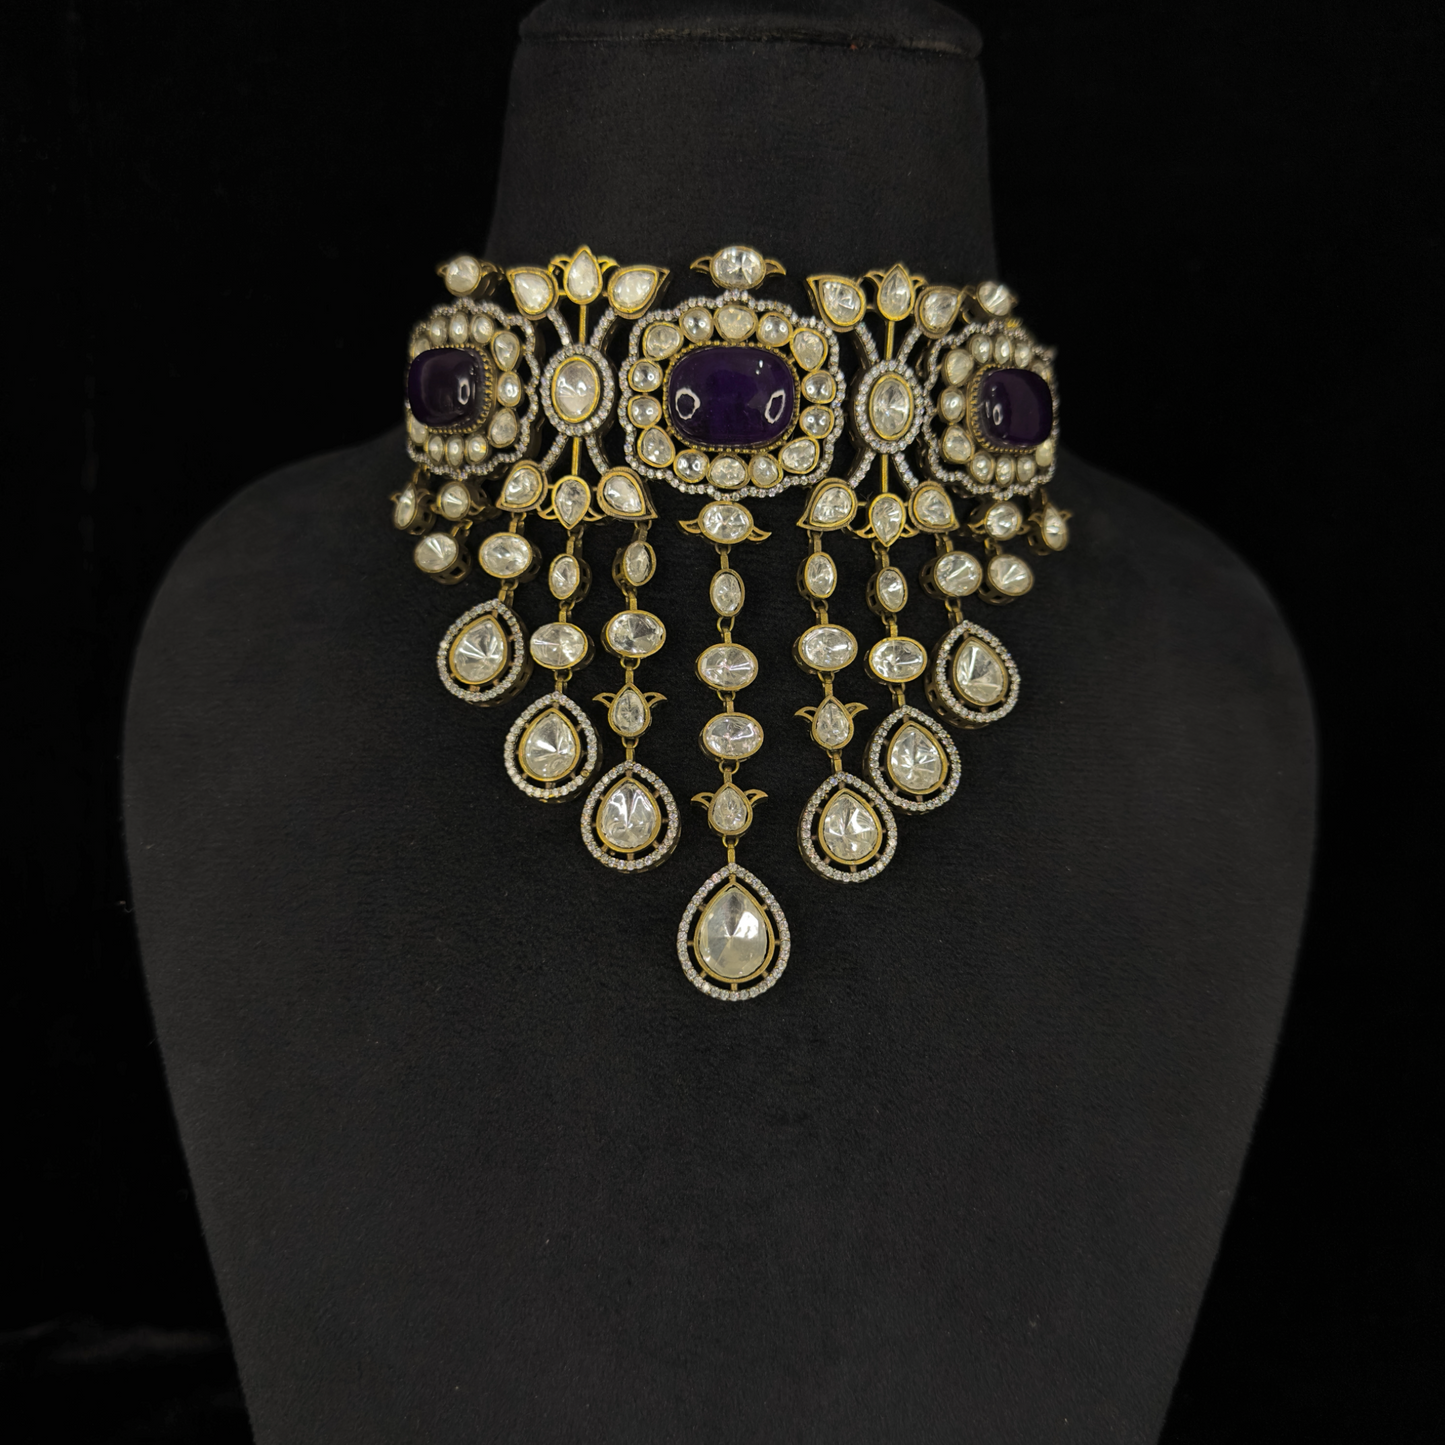 Heavy Bridal Victorian Designer Choker Set with Zircon & Polki stones. This Victorian Jewellery is available in a Purple colour variant. 